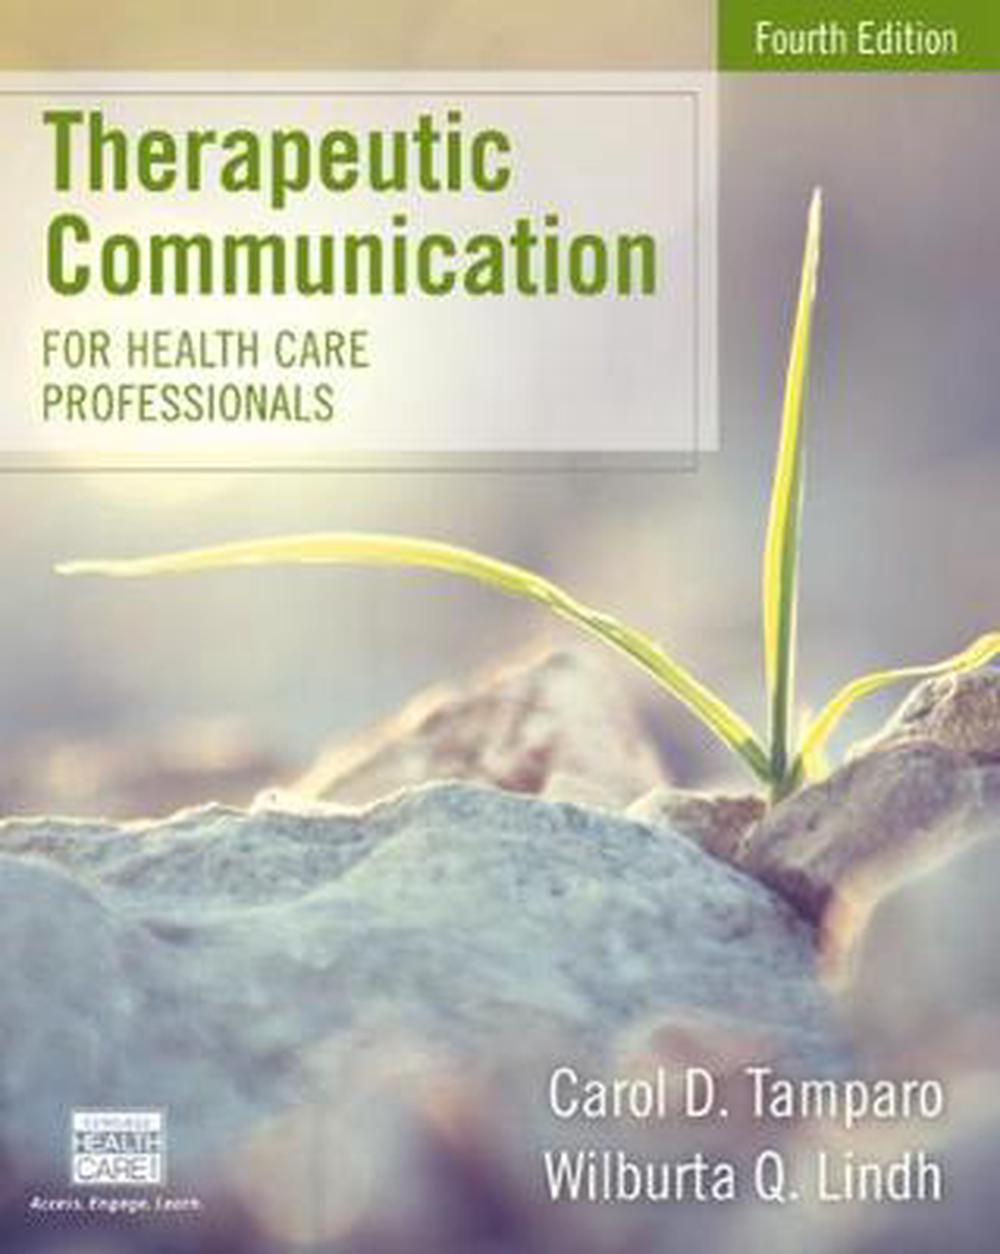 Therapeutic Communication for Health Care Professionals, 4th ed.